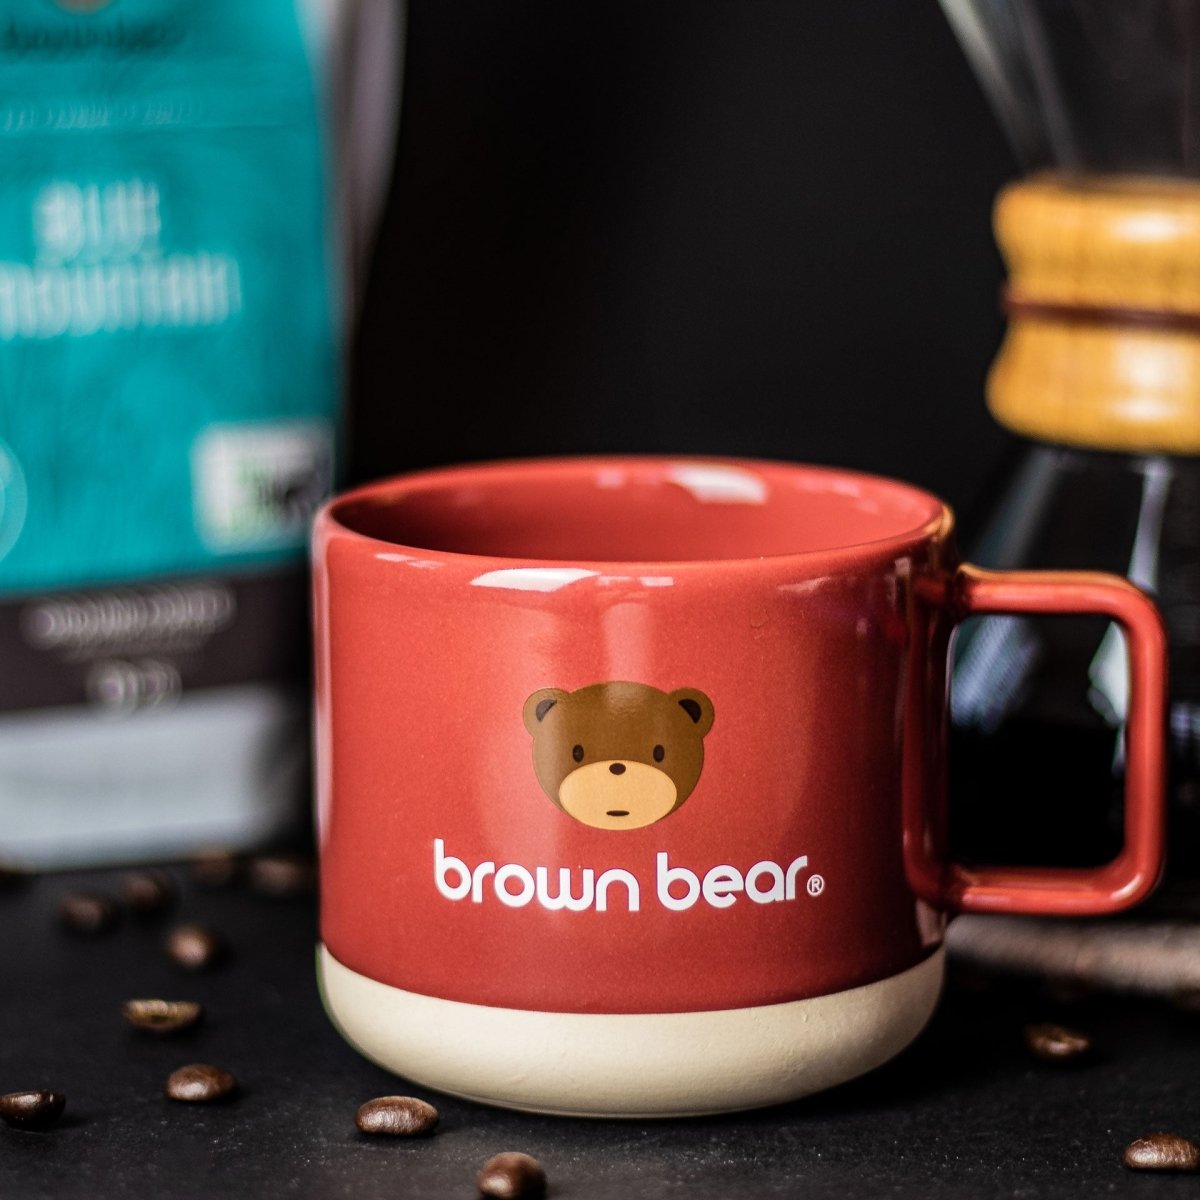 Premium Travel Mug from Black-Blum with a Brown Bear engraving | Thermobecher